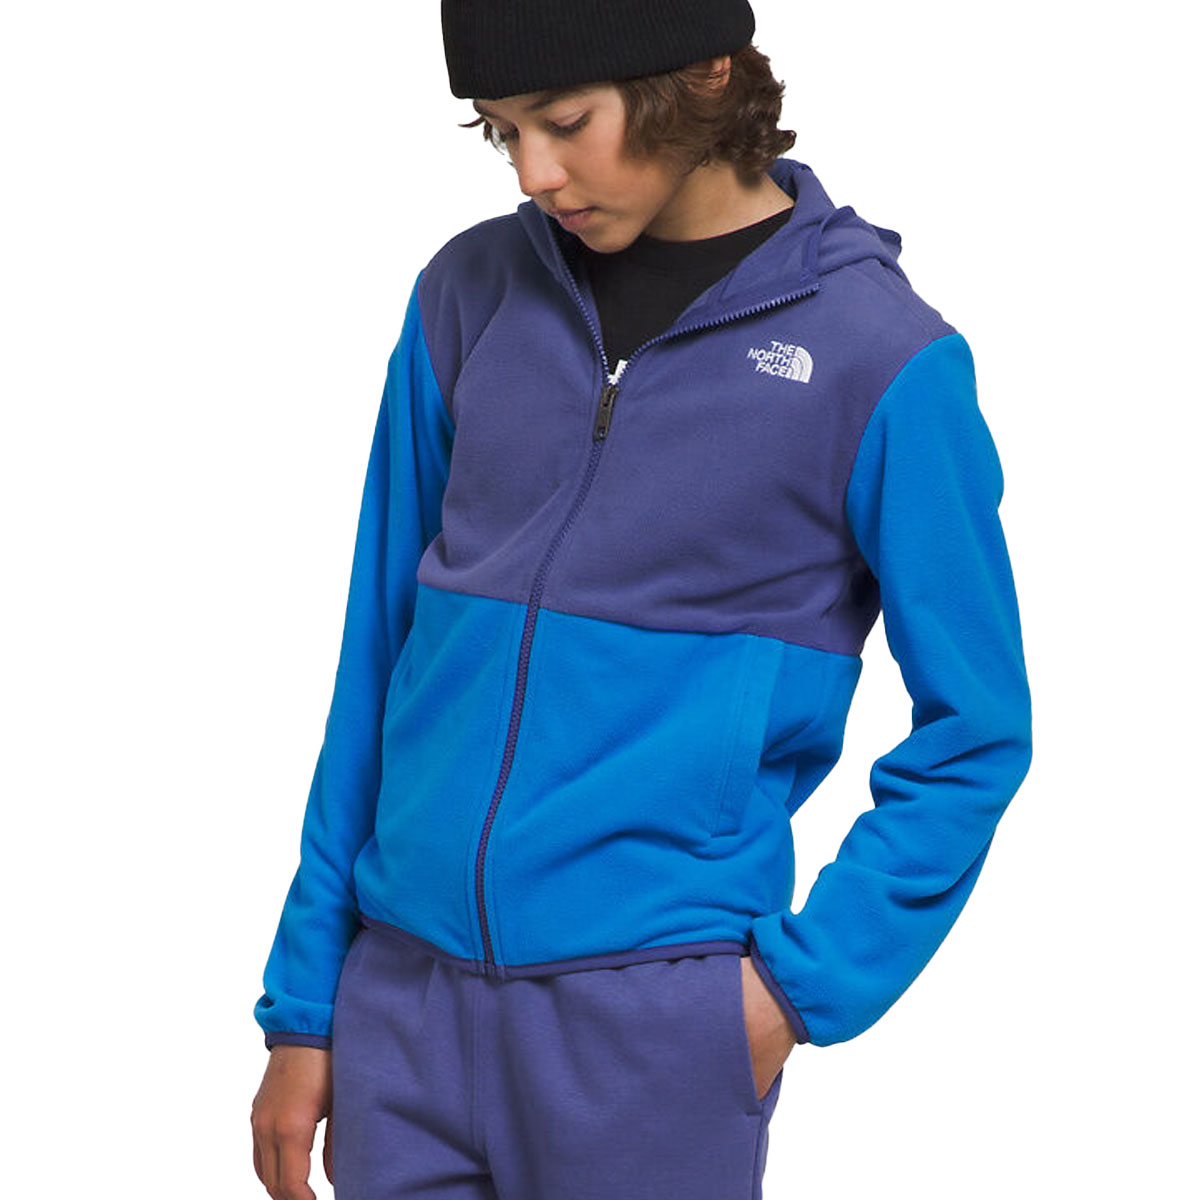 THE NORTH FACE - TEEN GLACIER F/Z HOODED